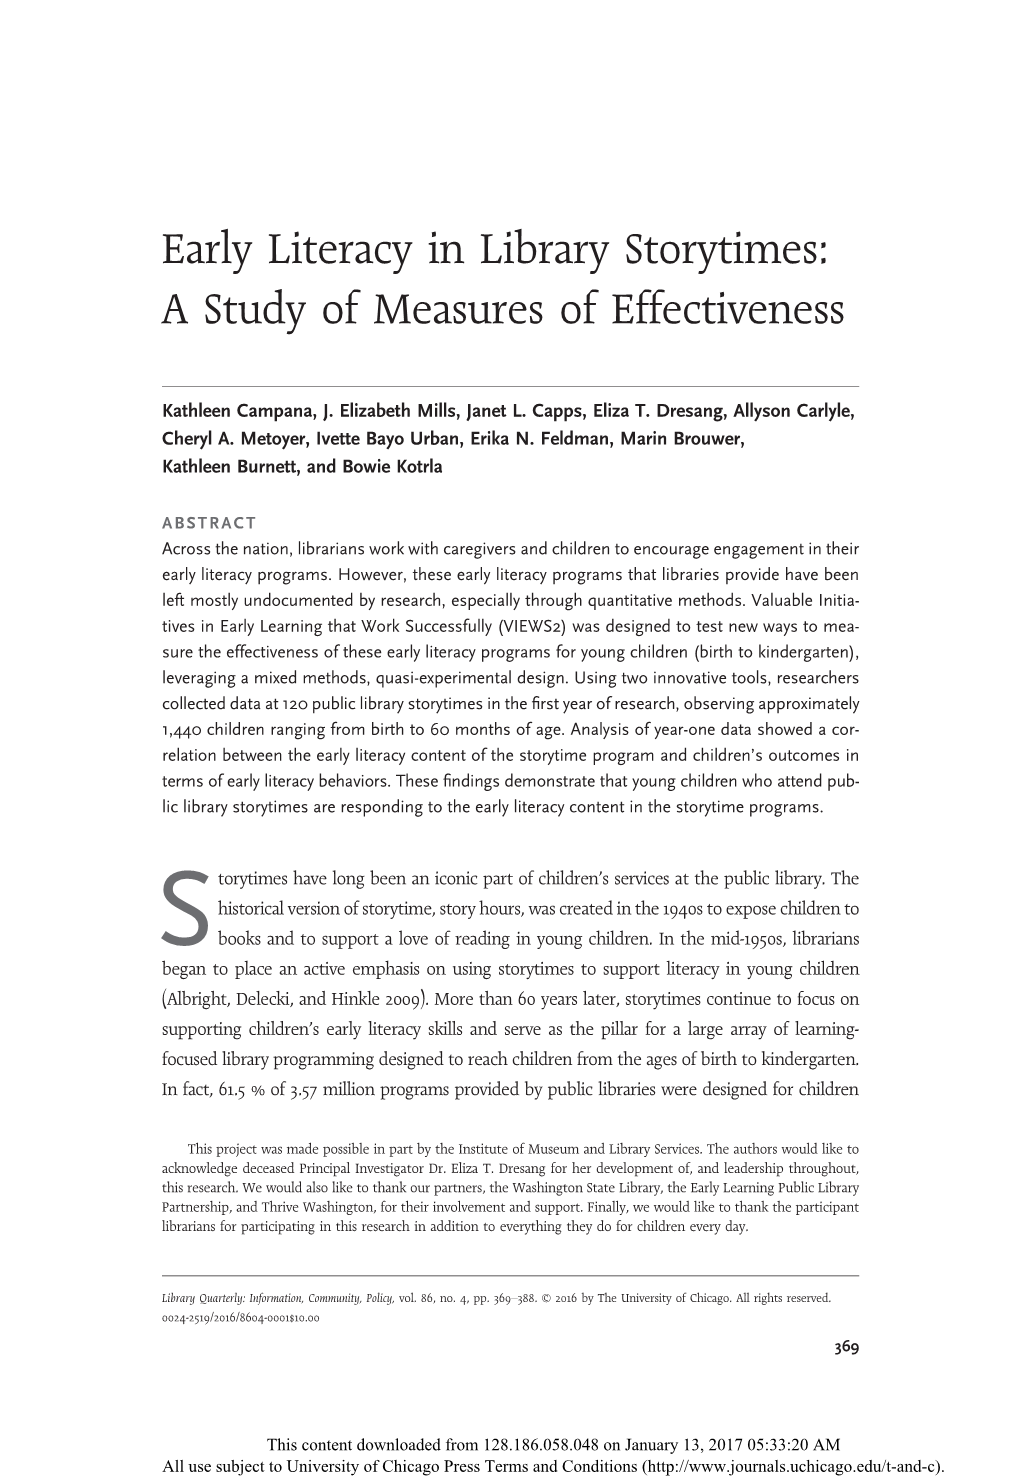 Early Literacy in Library Storytimes: a Study of Measures of Effectiveness